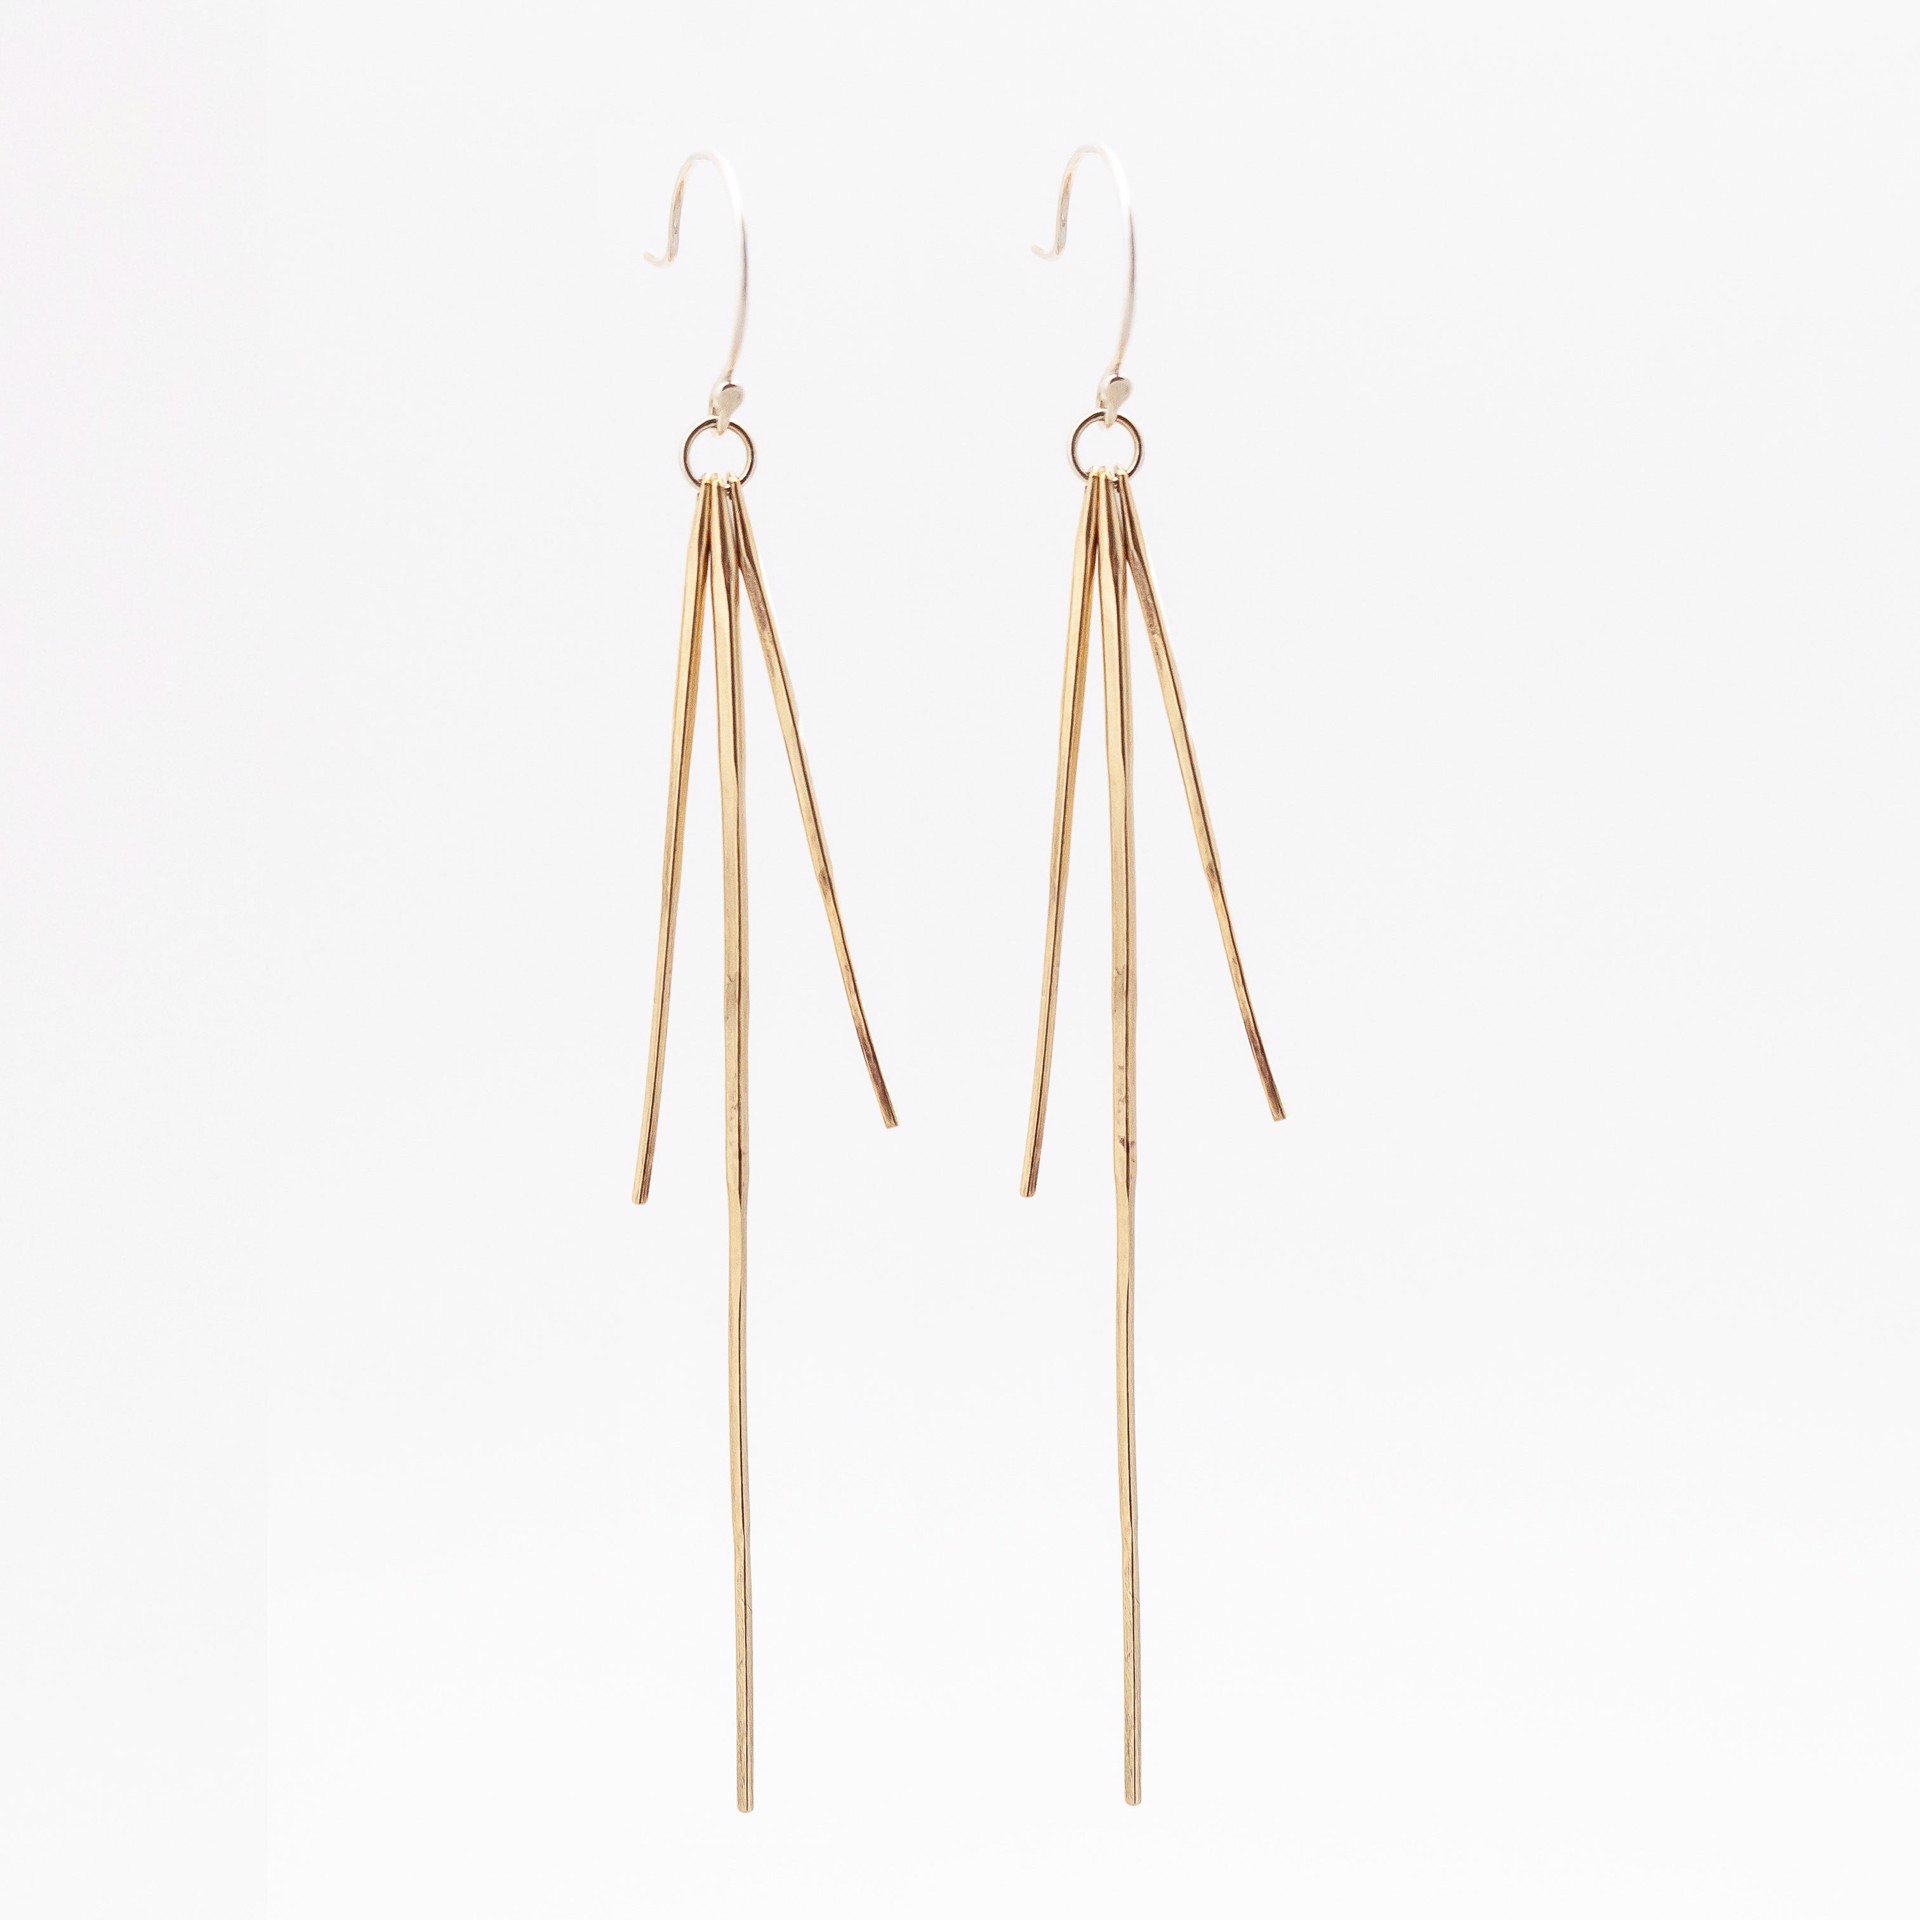 Cactus Spine Earrings - Brass by Clementine & Co. Jewelry